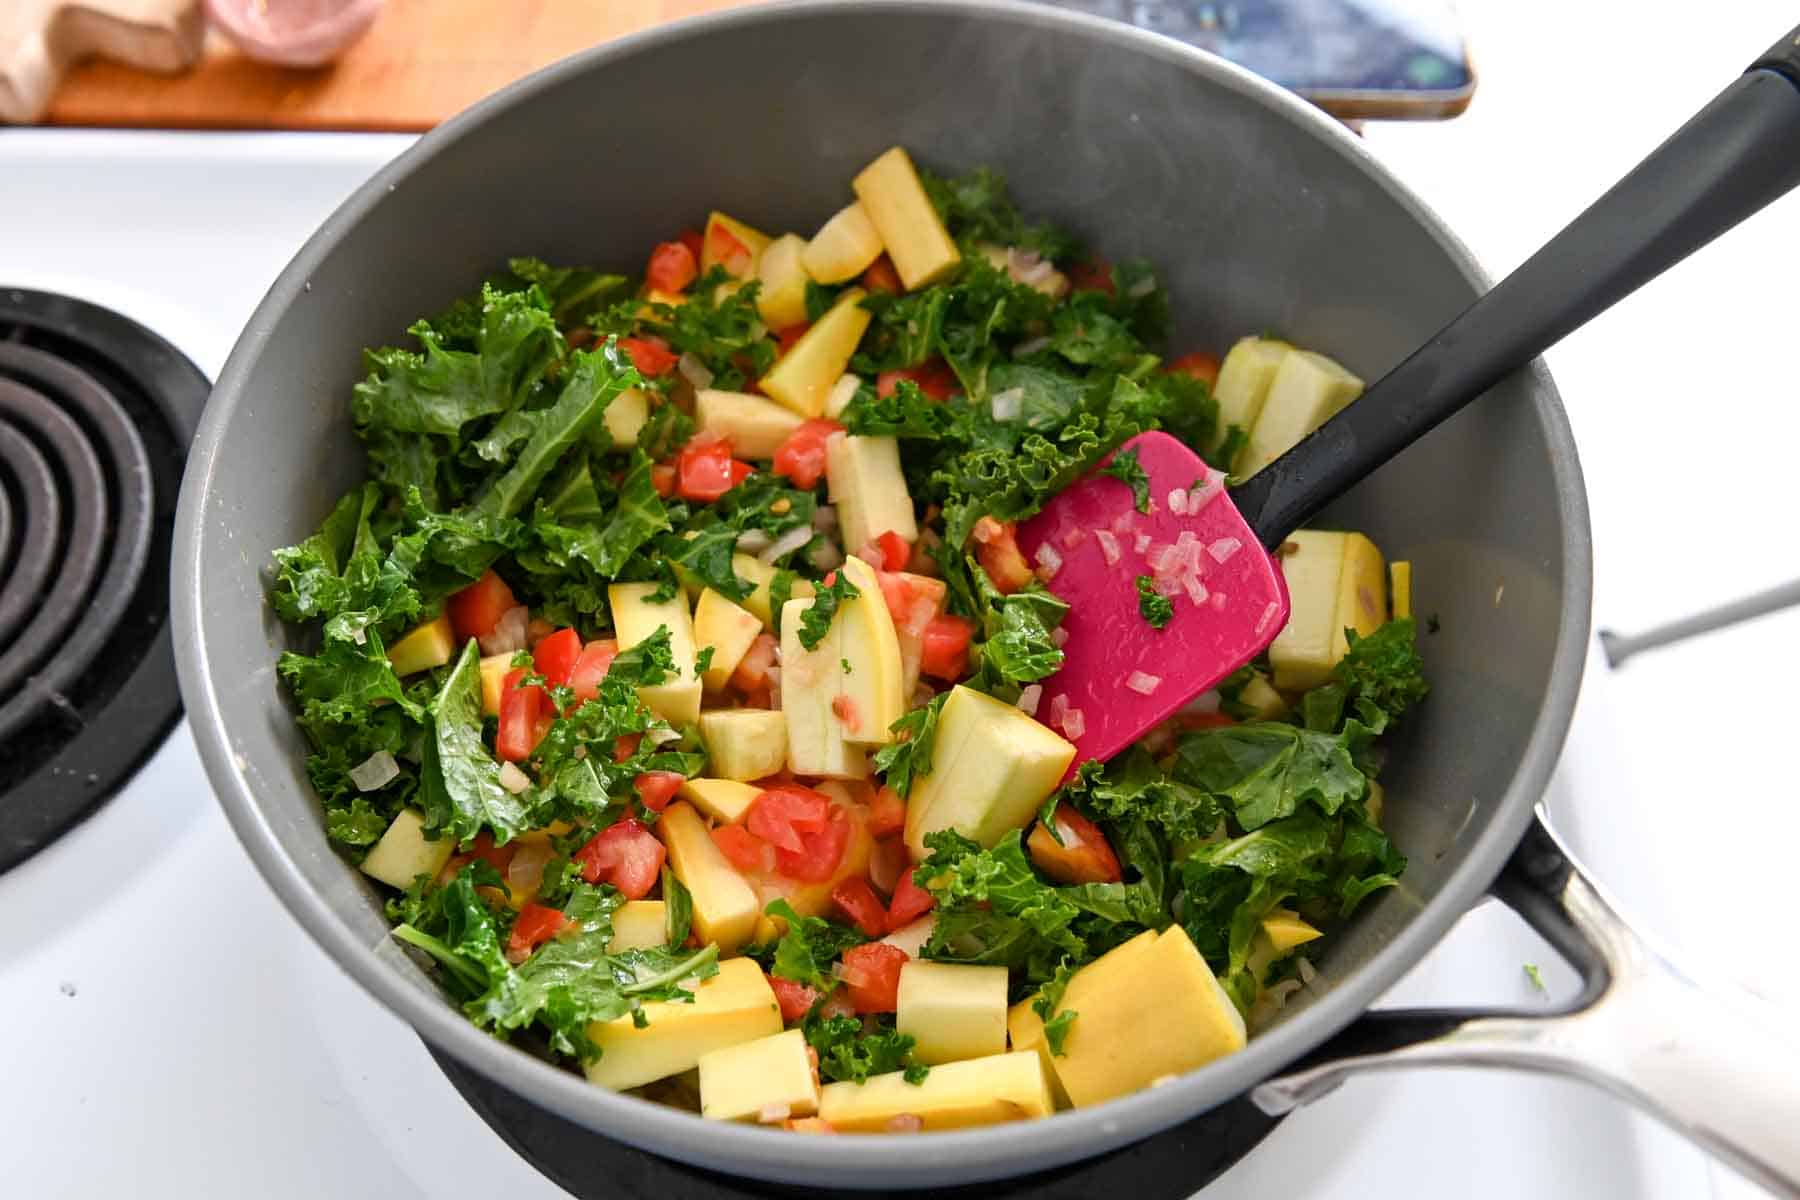 Kale, squash, tomatoes, and shallots in a gray pot.